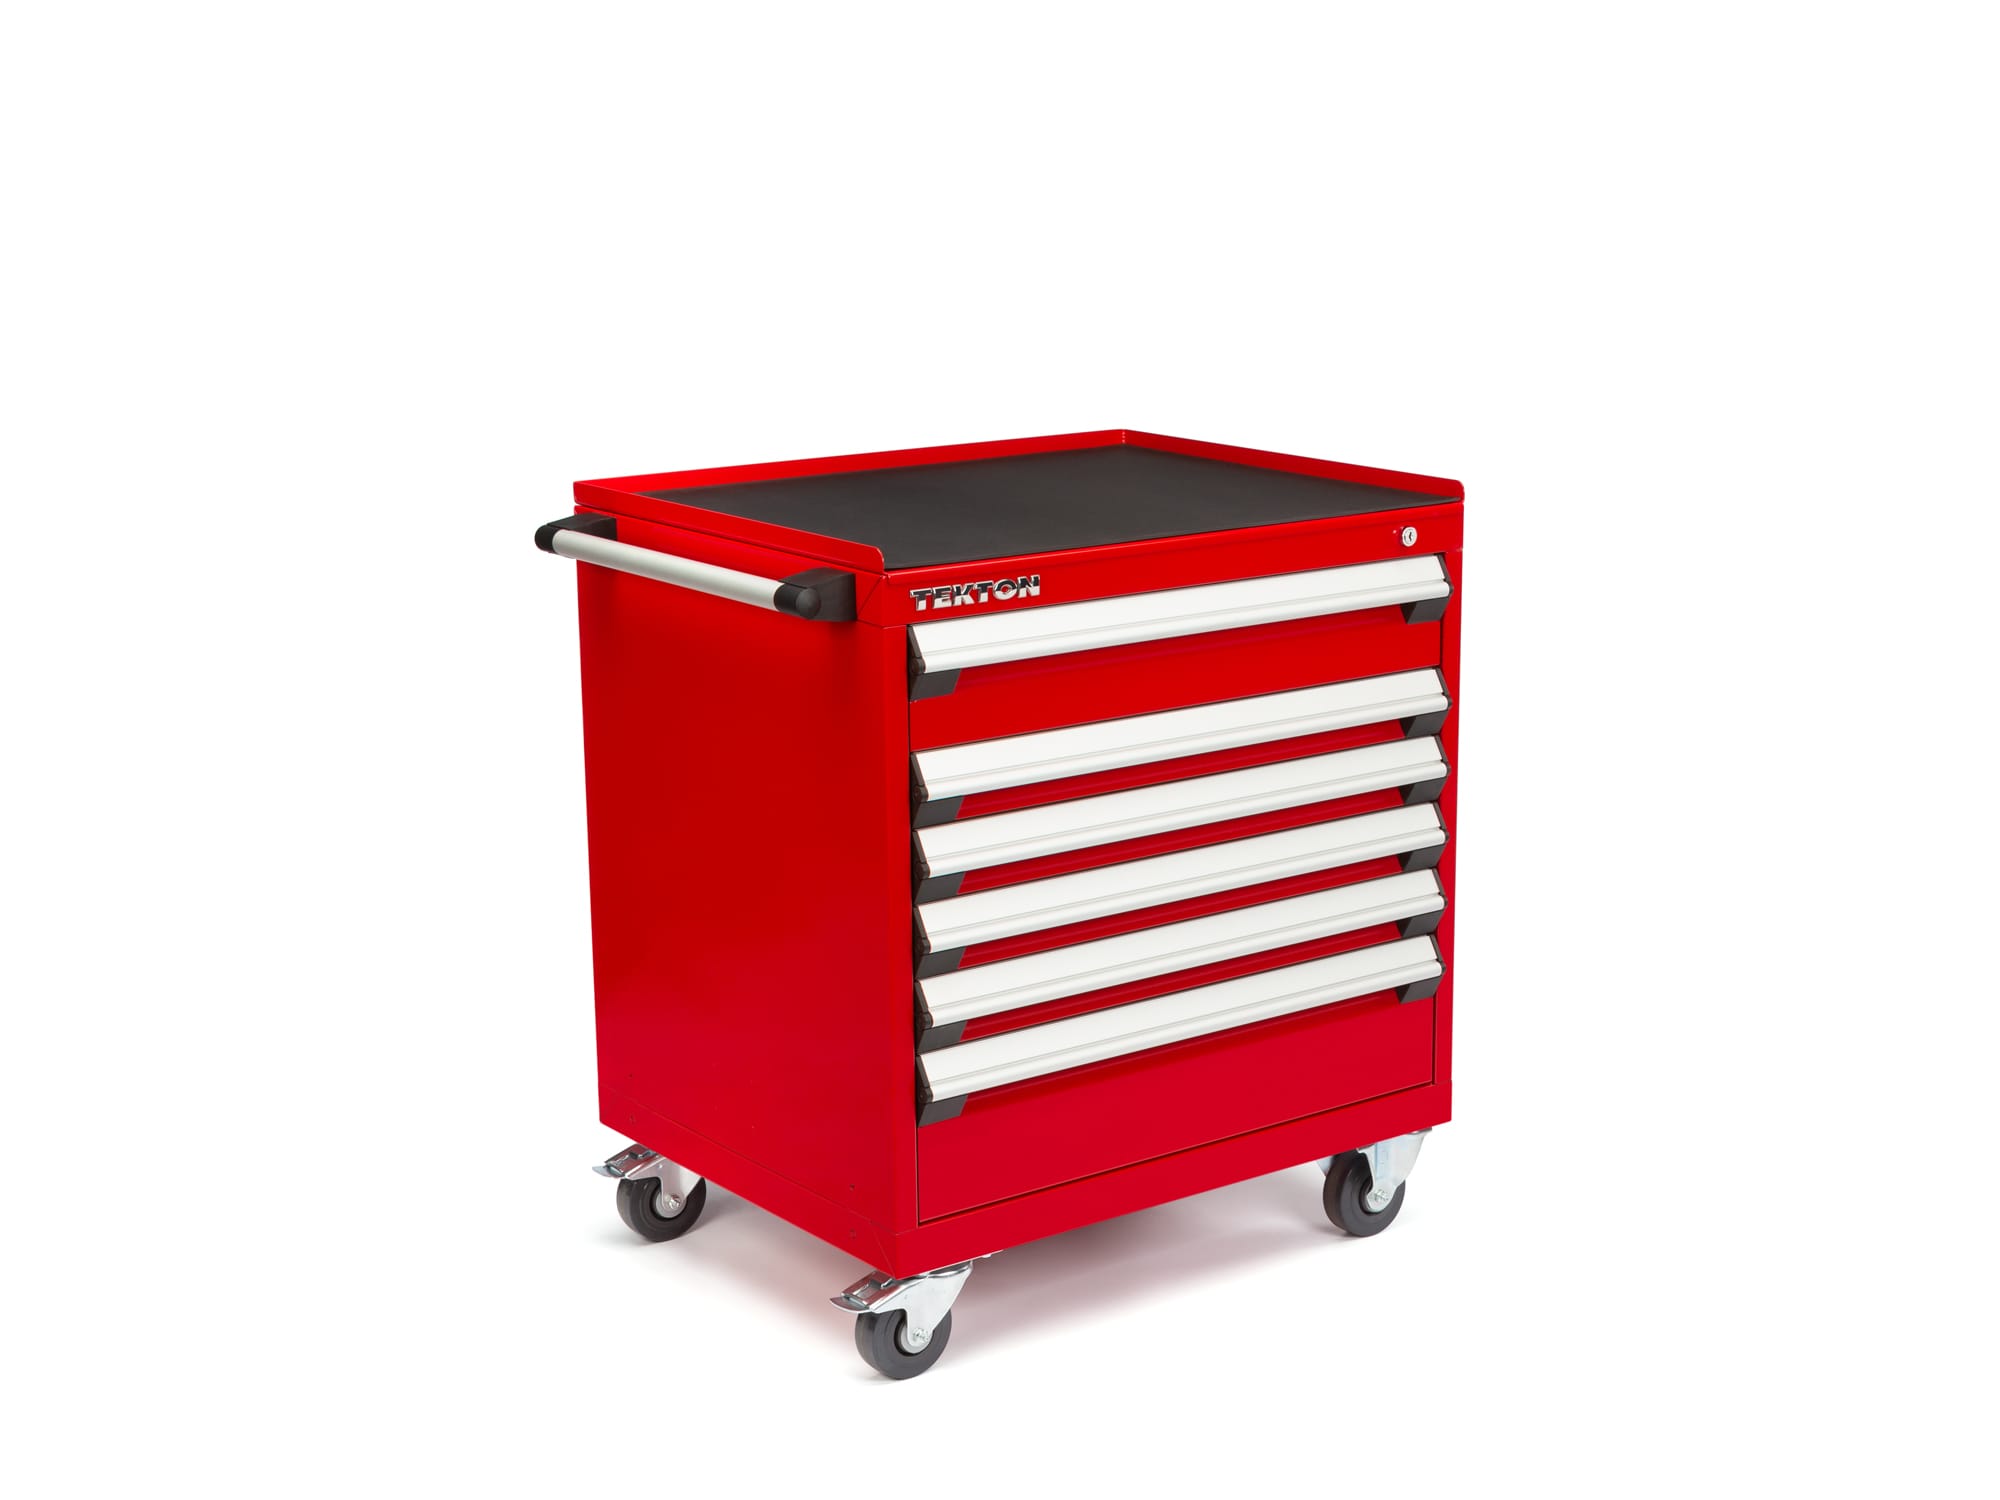 30 x 24 Inch Tool Cabinet (Red)